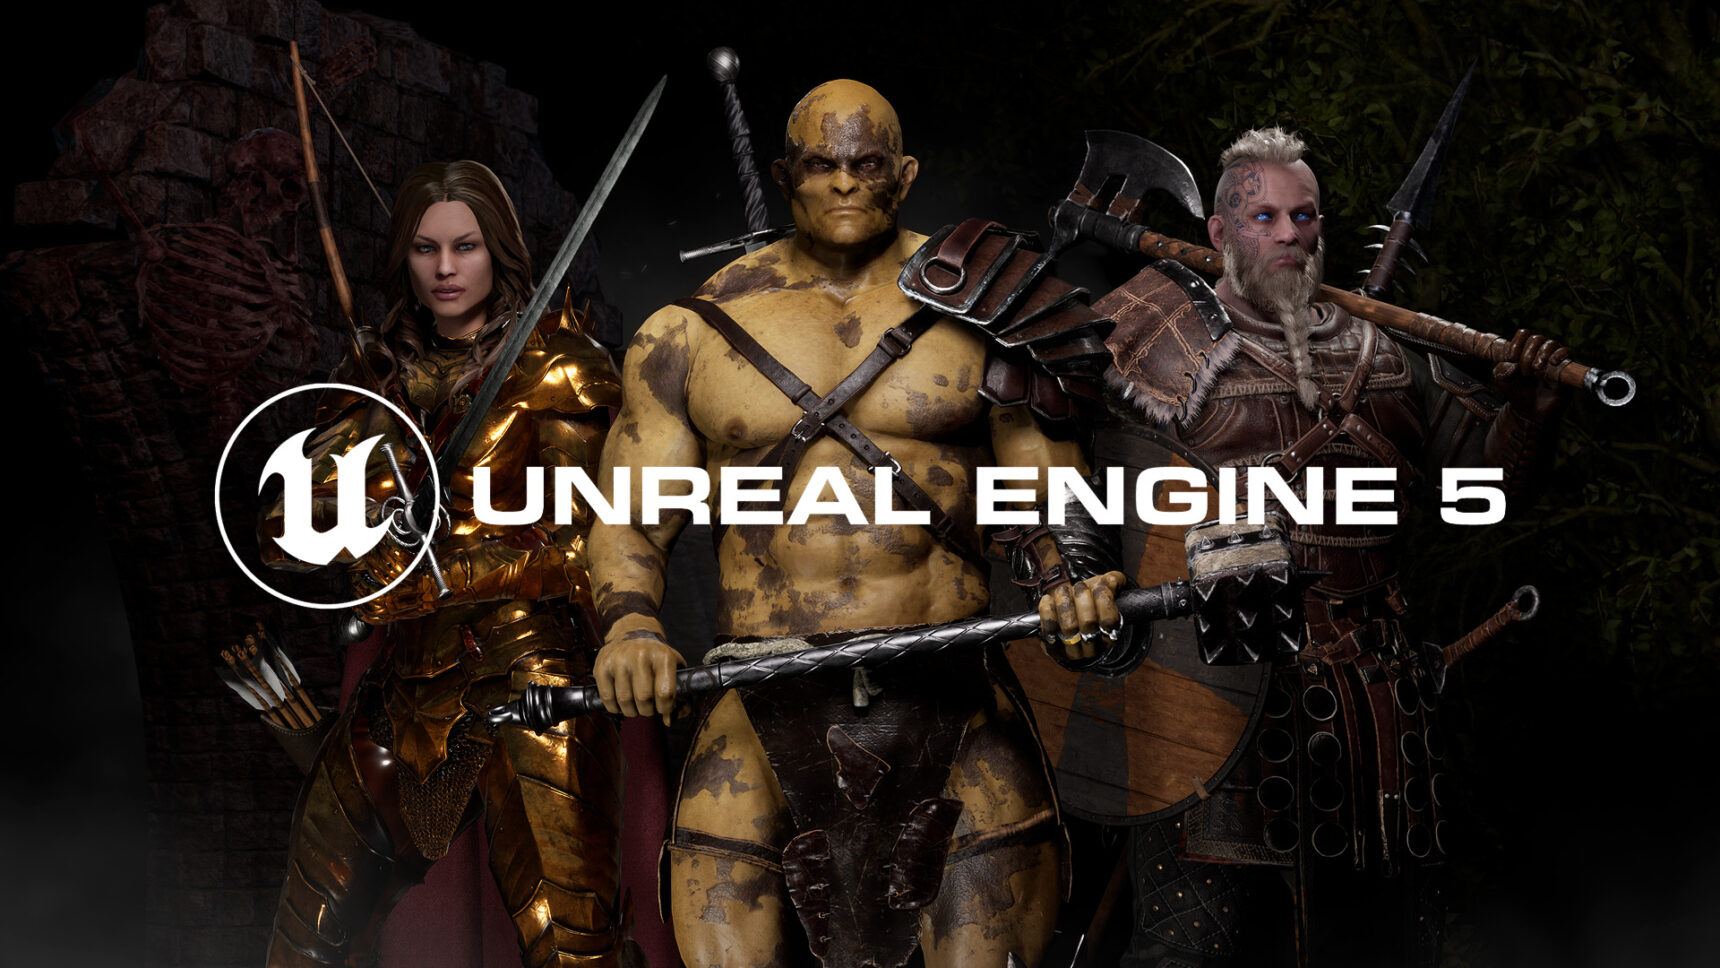 Mortal Online 2 shows us a preview of its update to Unreal Engine 5